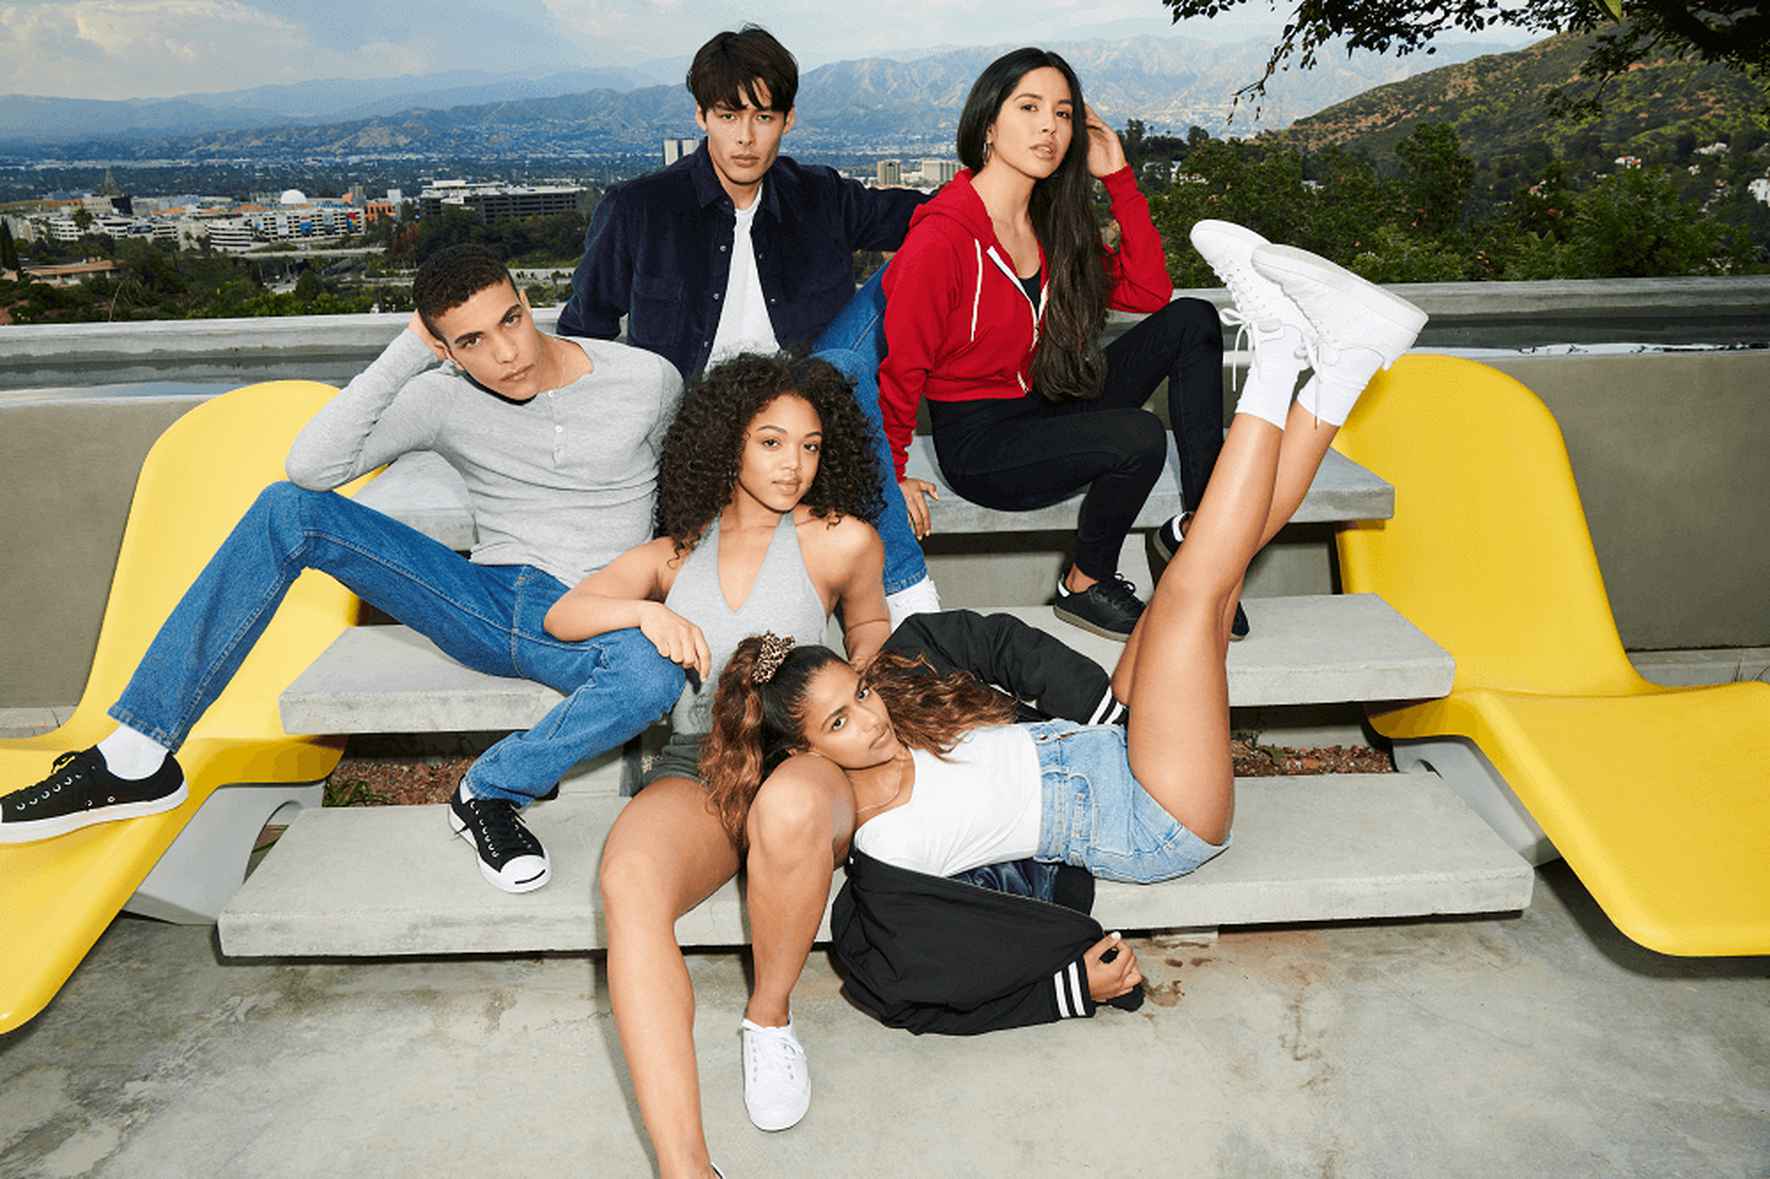 5 people are sitting outside looking at the camera, with the American Apparel™ logo in the center.